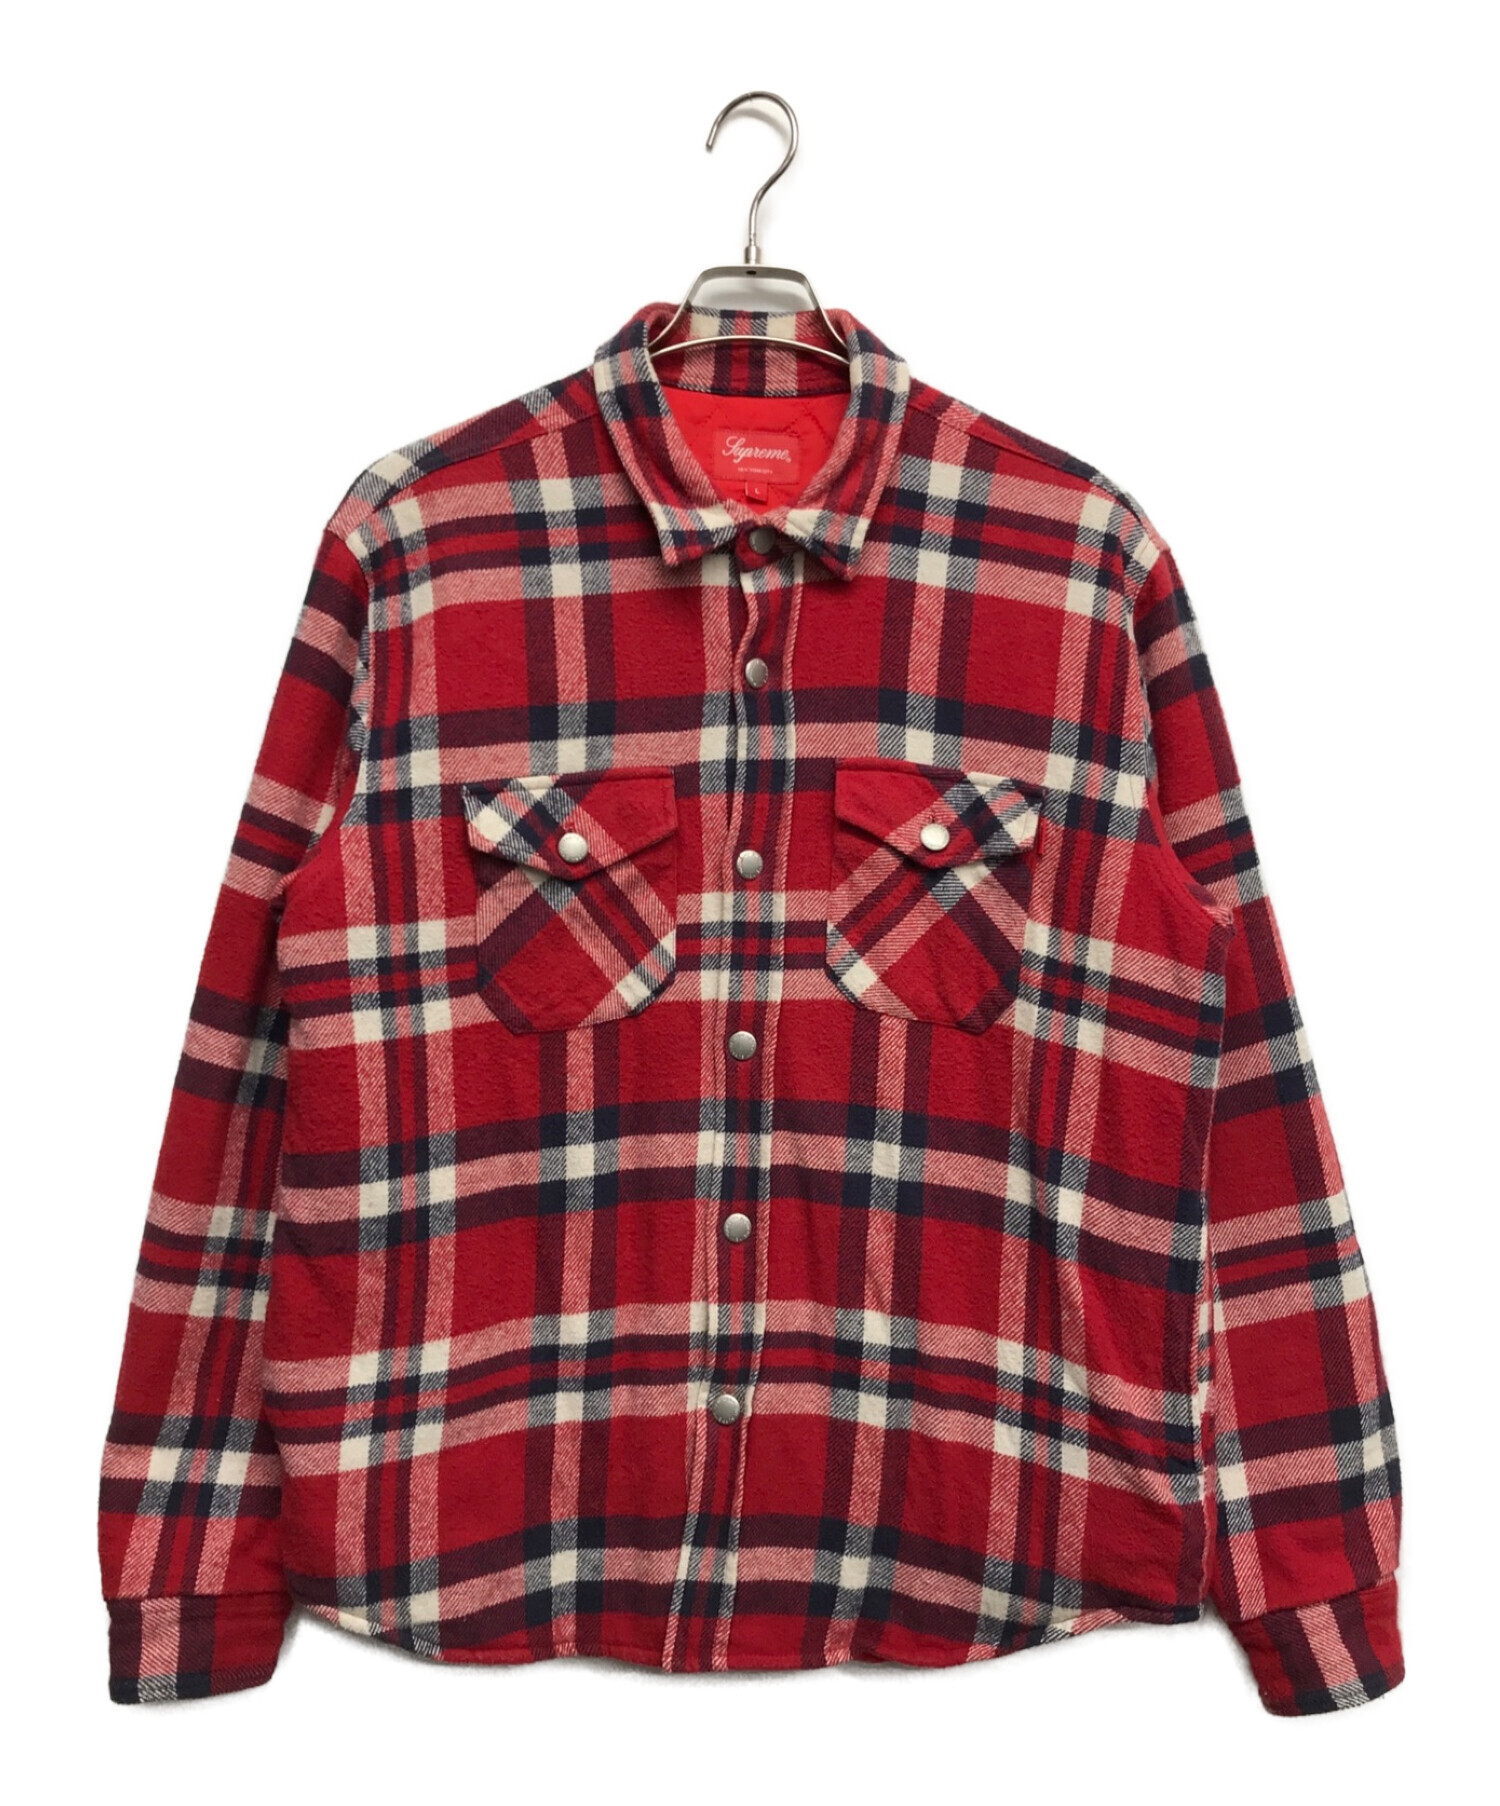 Supreme Quilted Flannel Shirt サイズL